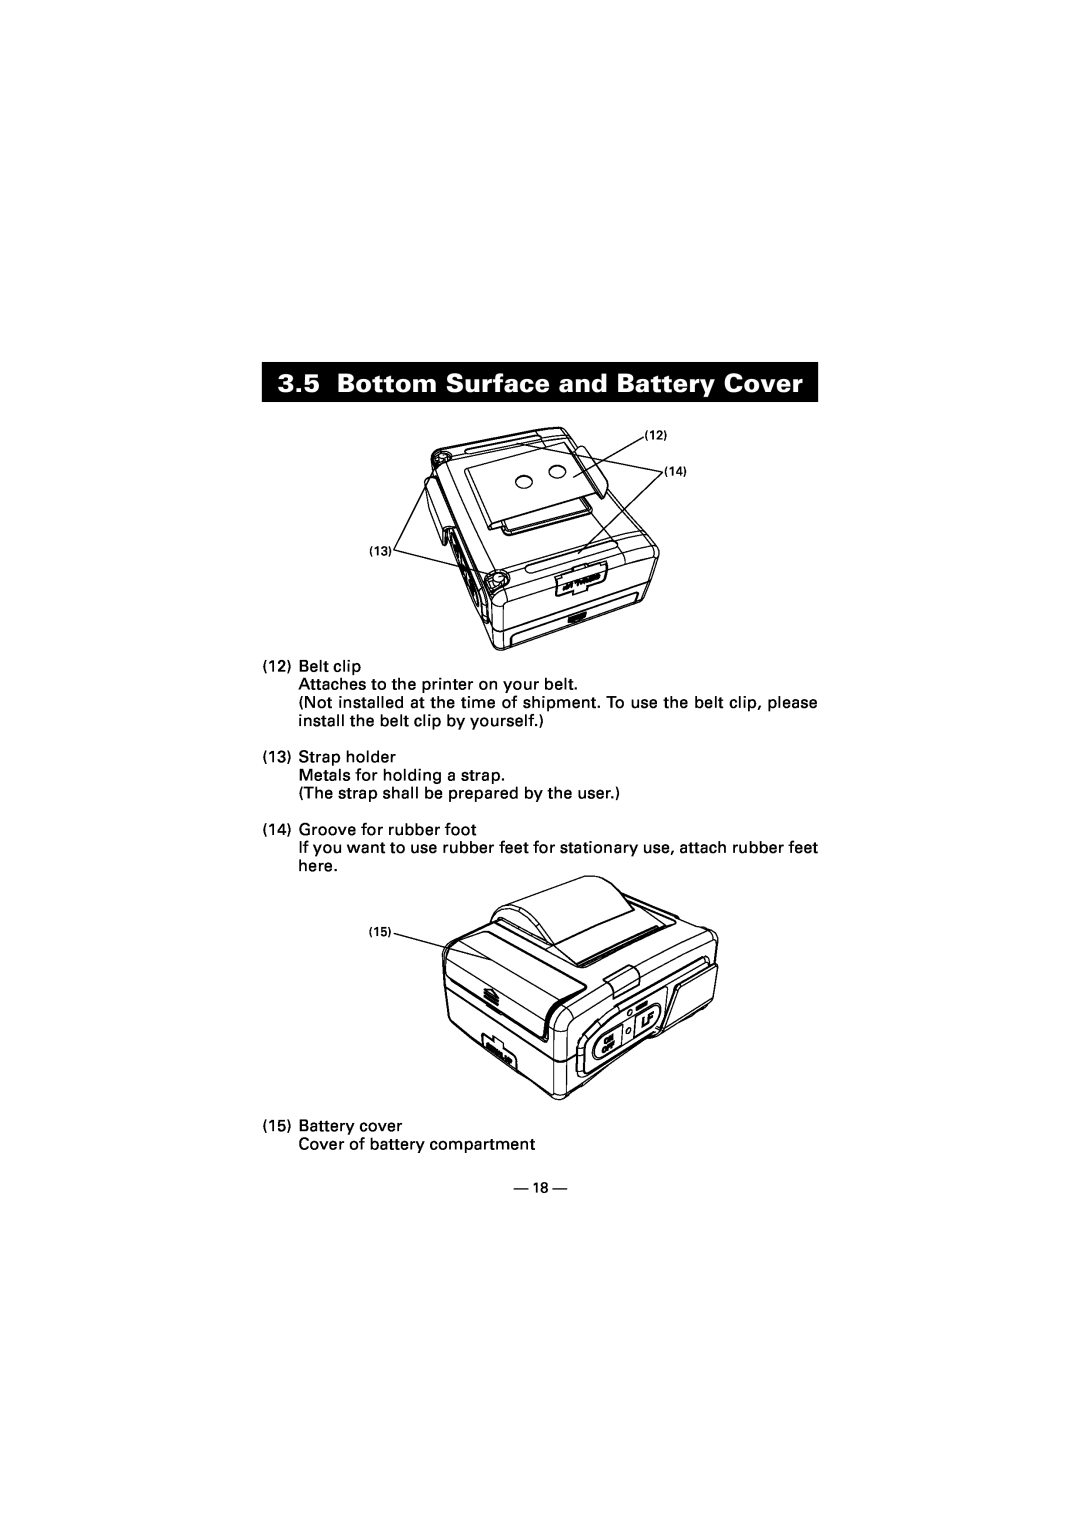 Citizen Systems CMP-10 manual Bottom Surface and Battery Cover 